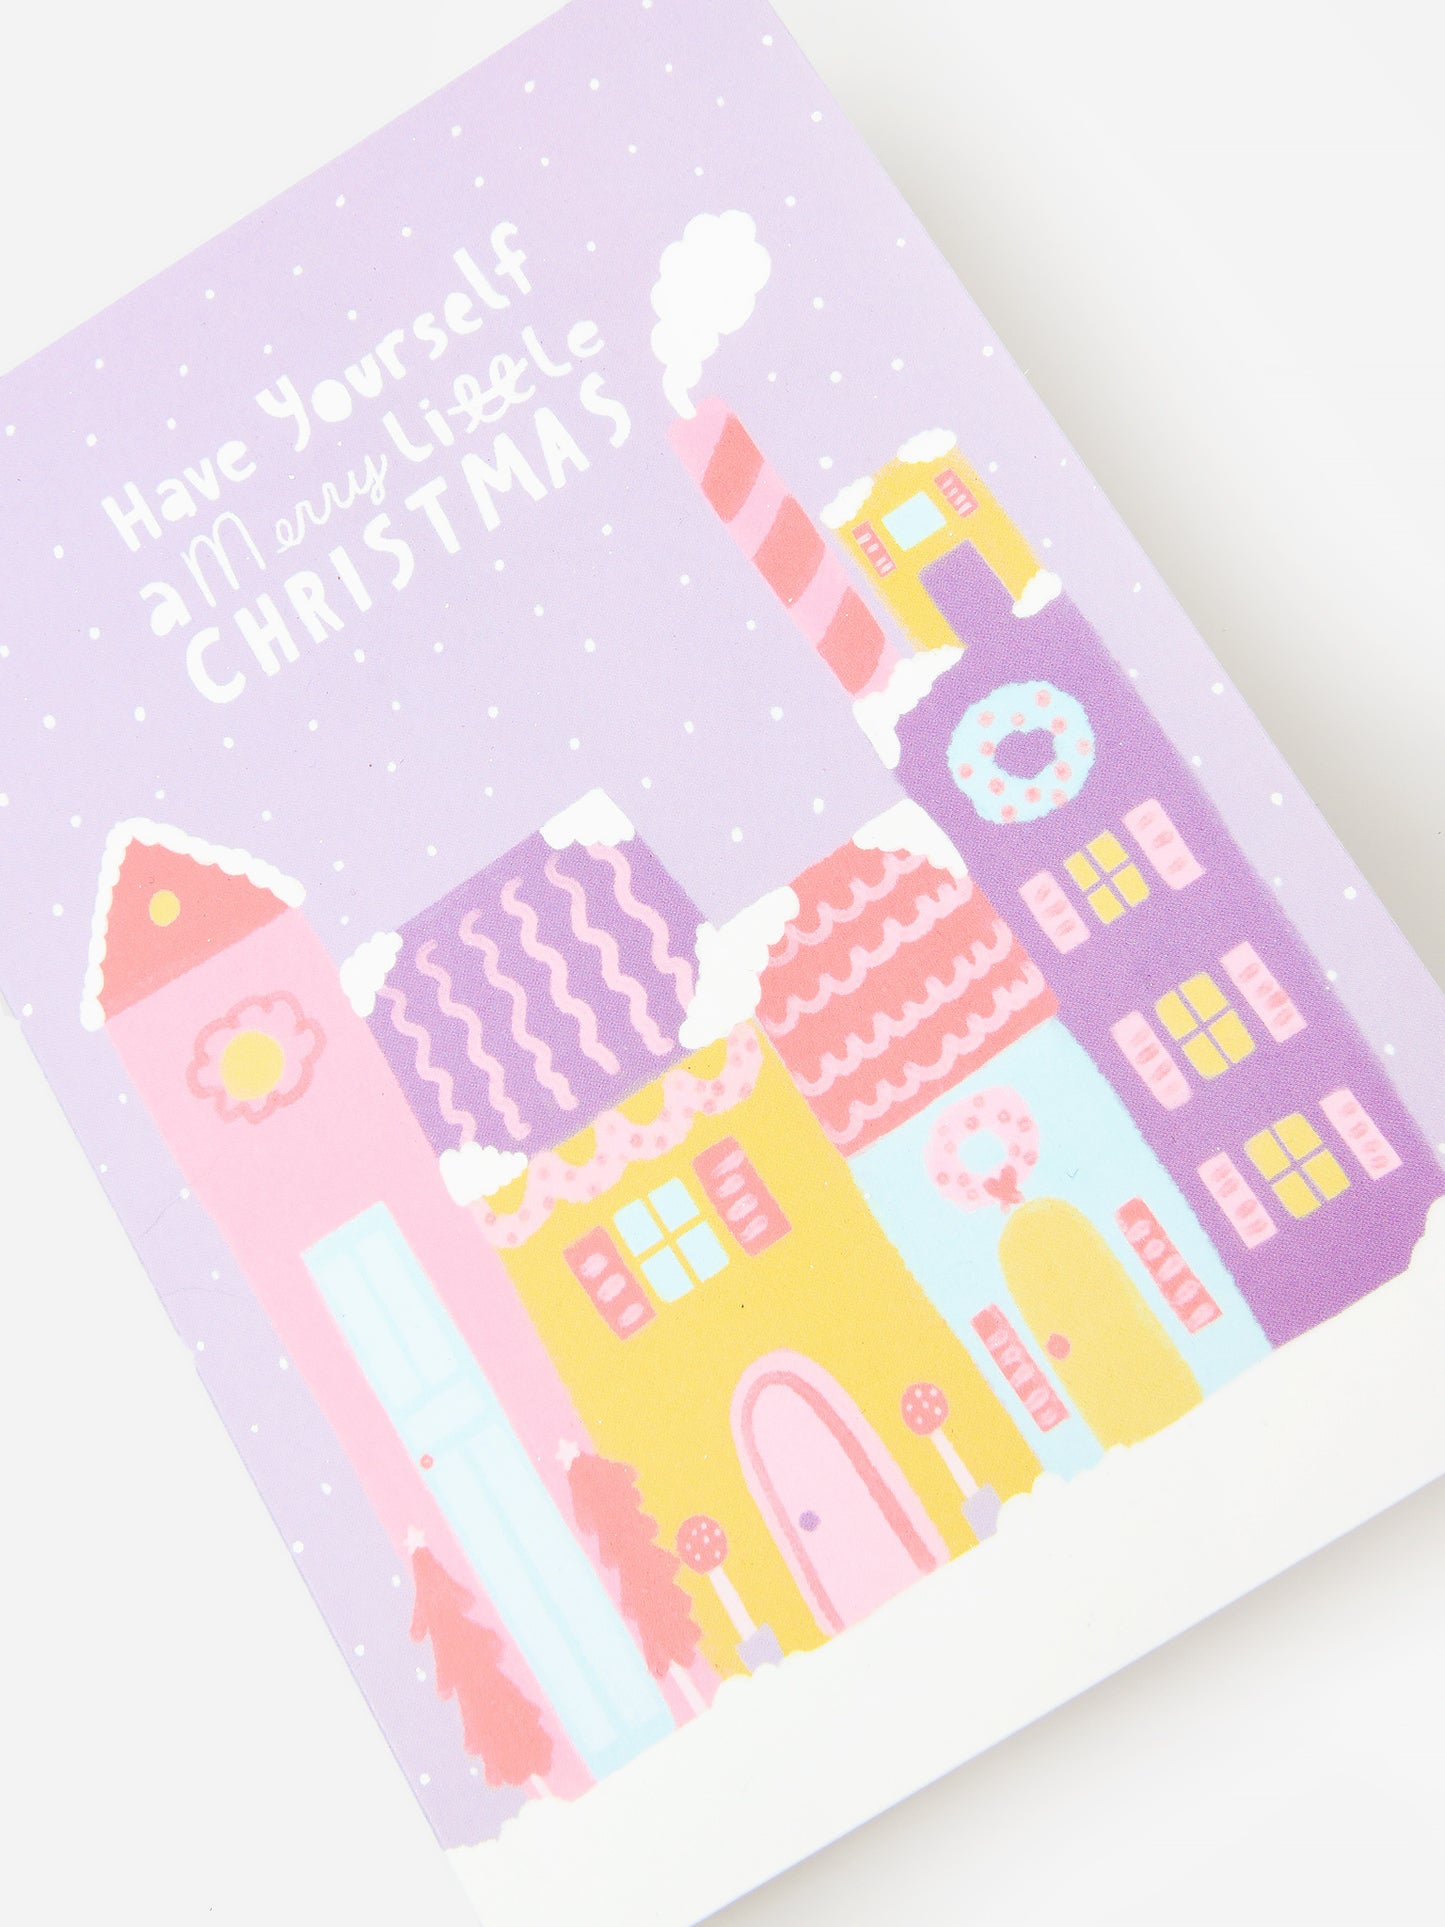 Normandie Illustration Merry Little Christmas Card